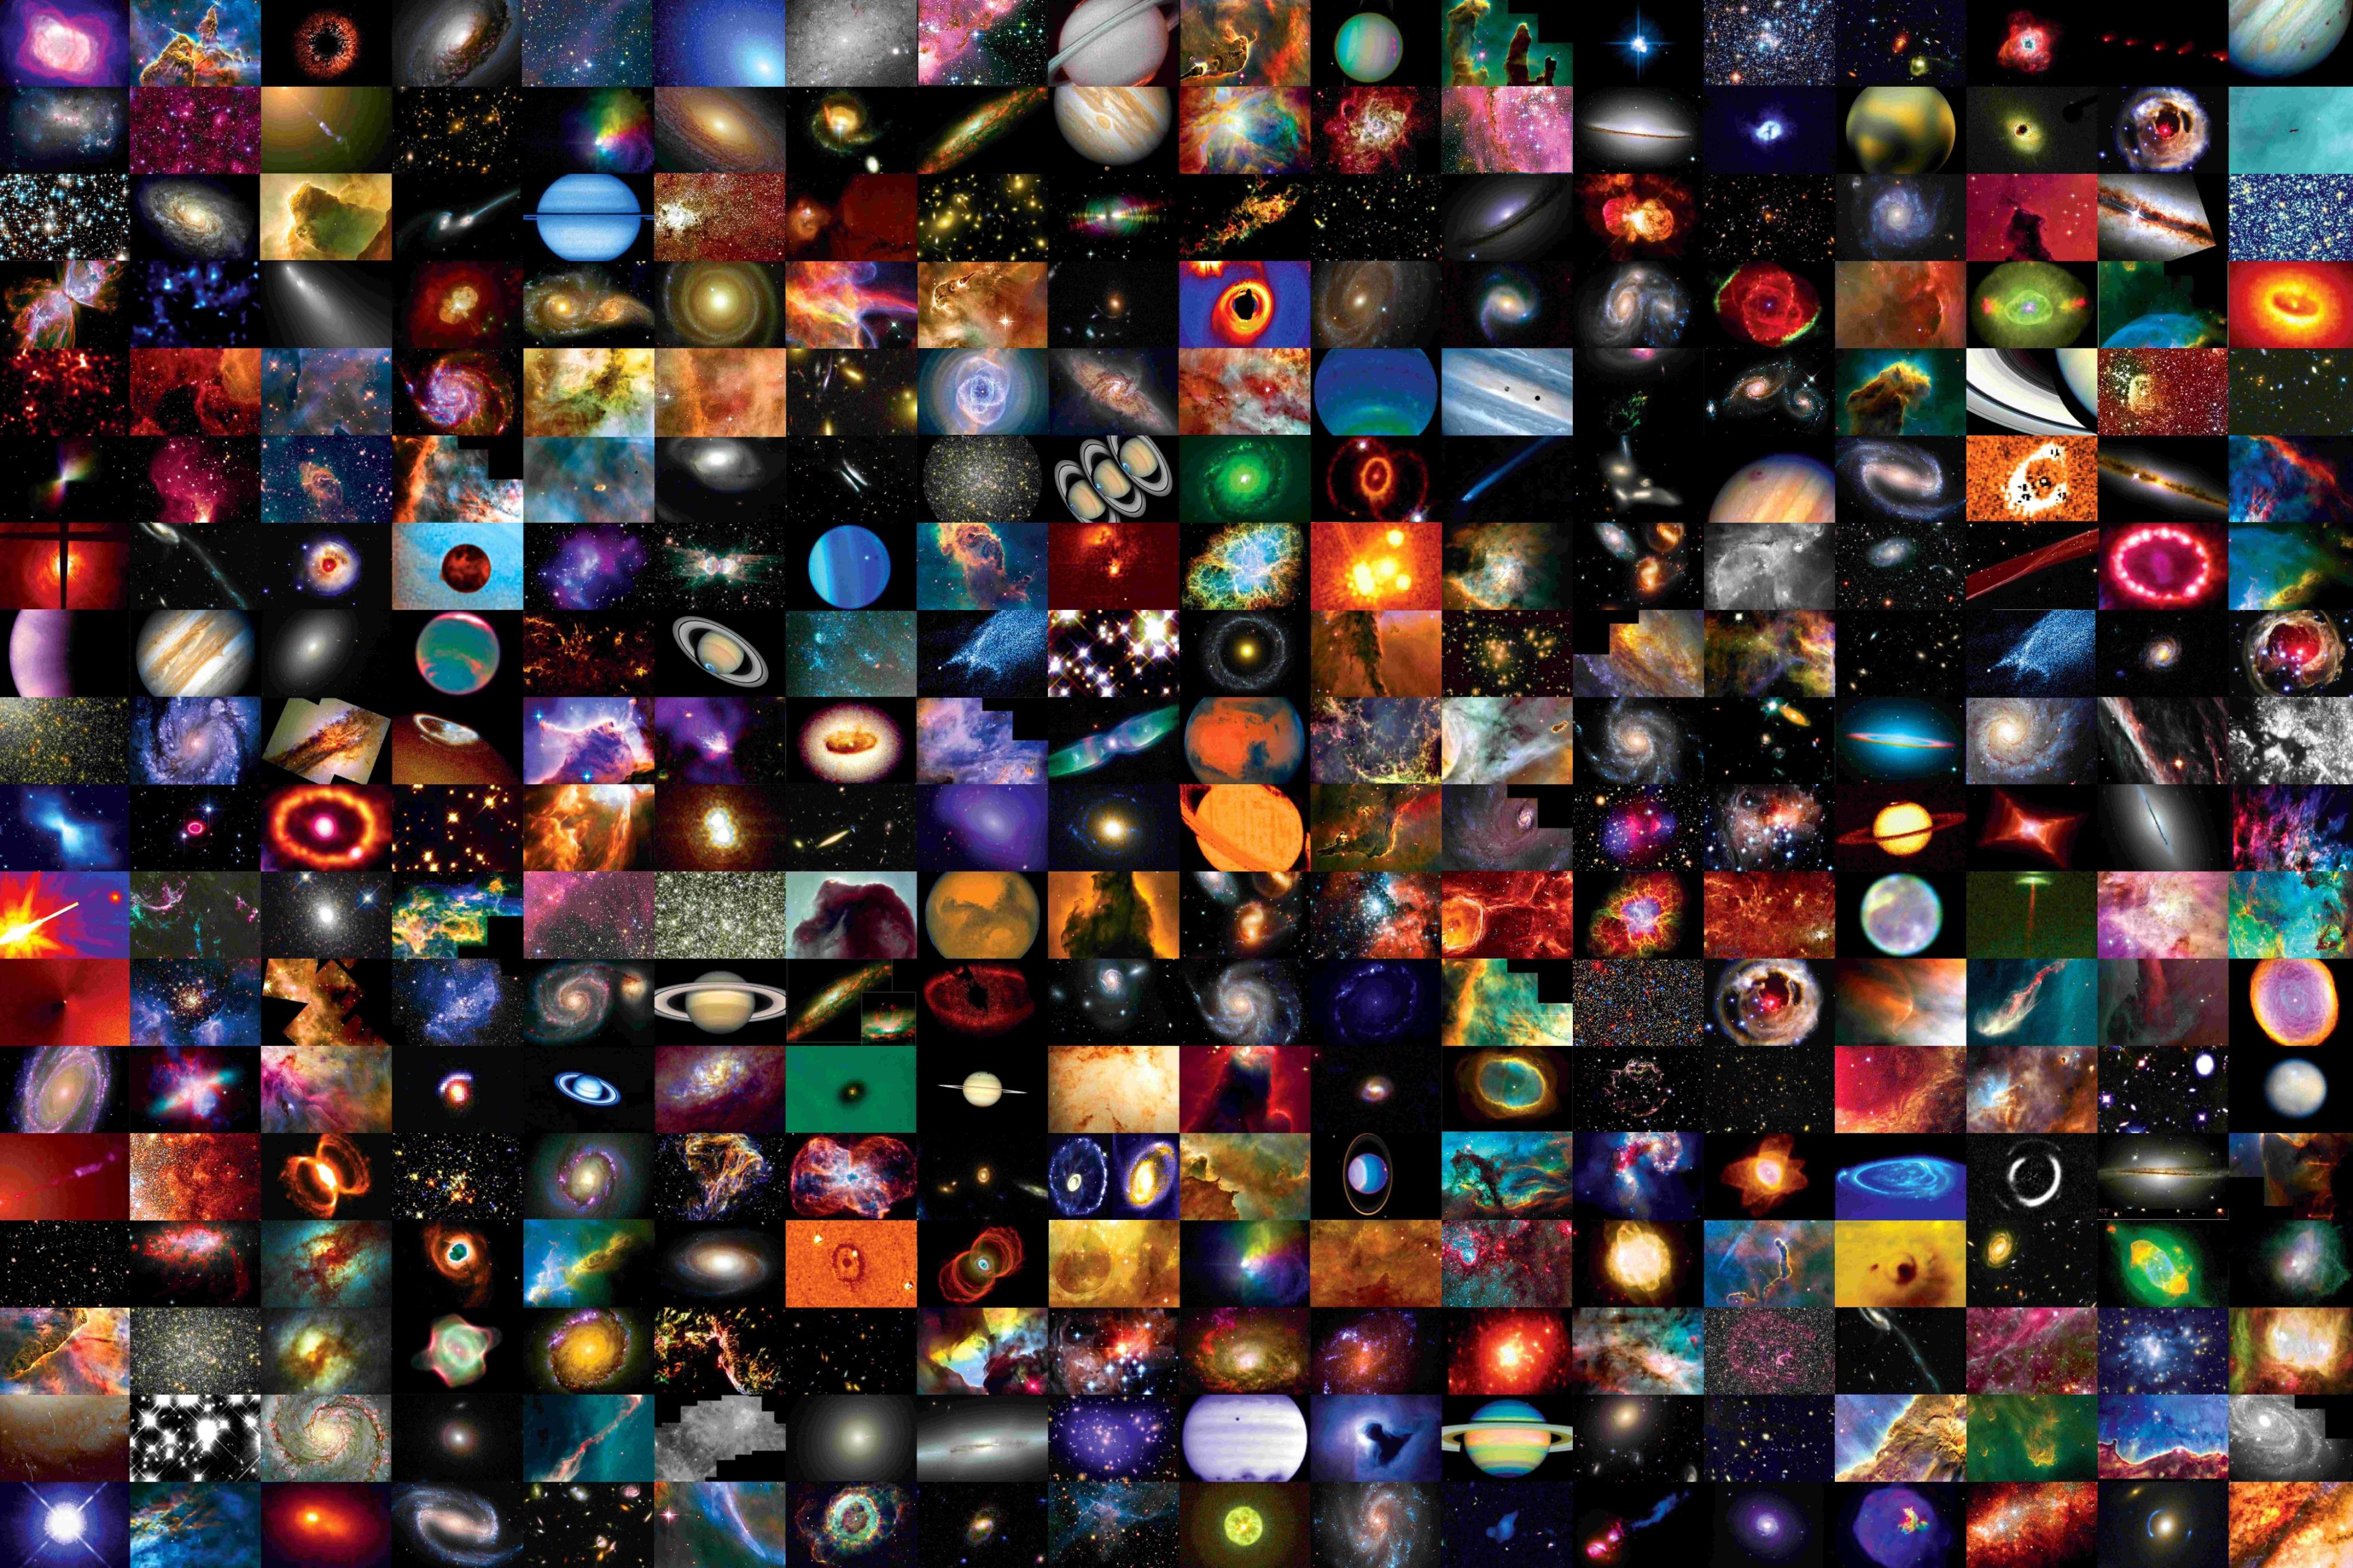 A colorful array of Hubble images. Rows and columns of images include the varied objects Hubble observes.